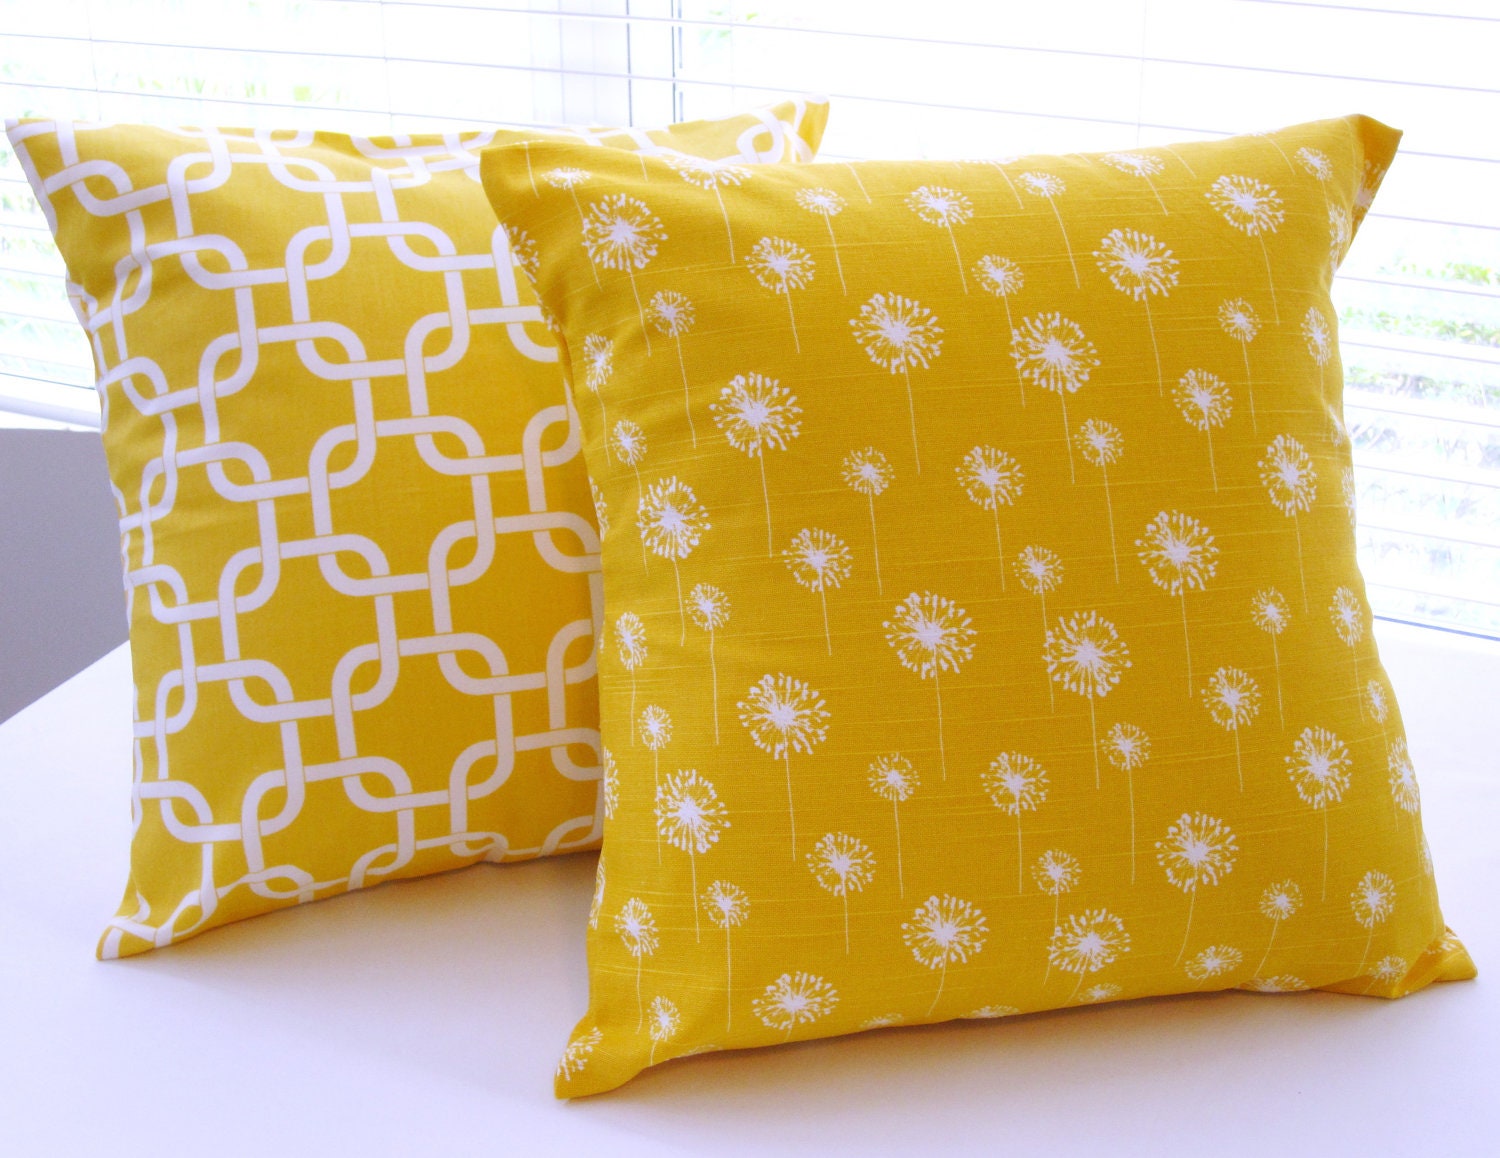 Decorative Pillows Bedding Yellow Pillow Covers by PillowsByJanet